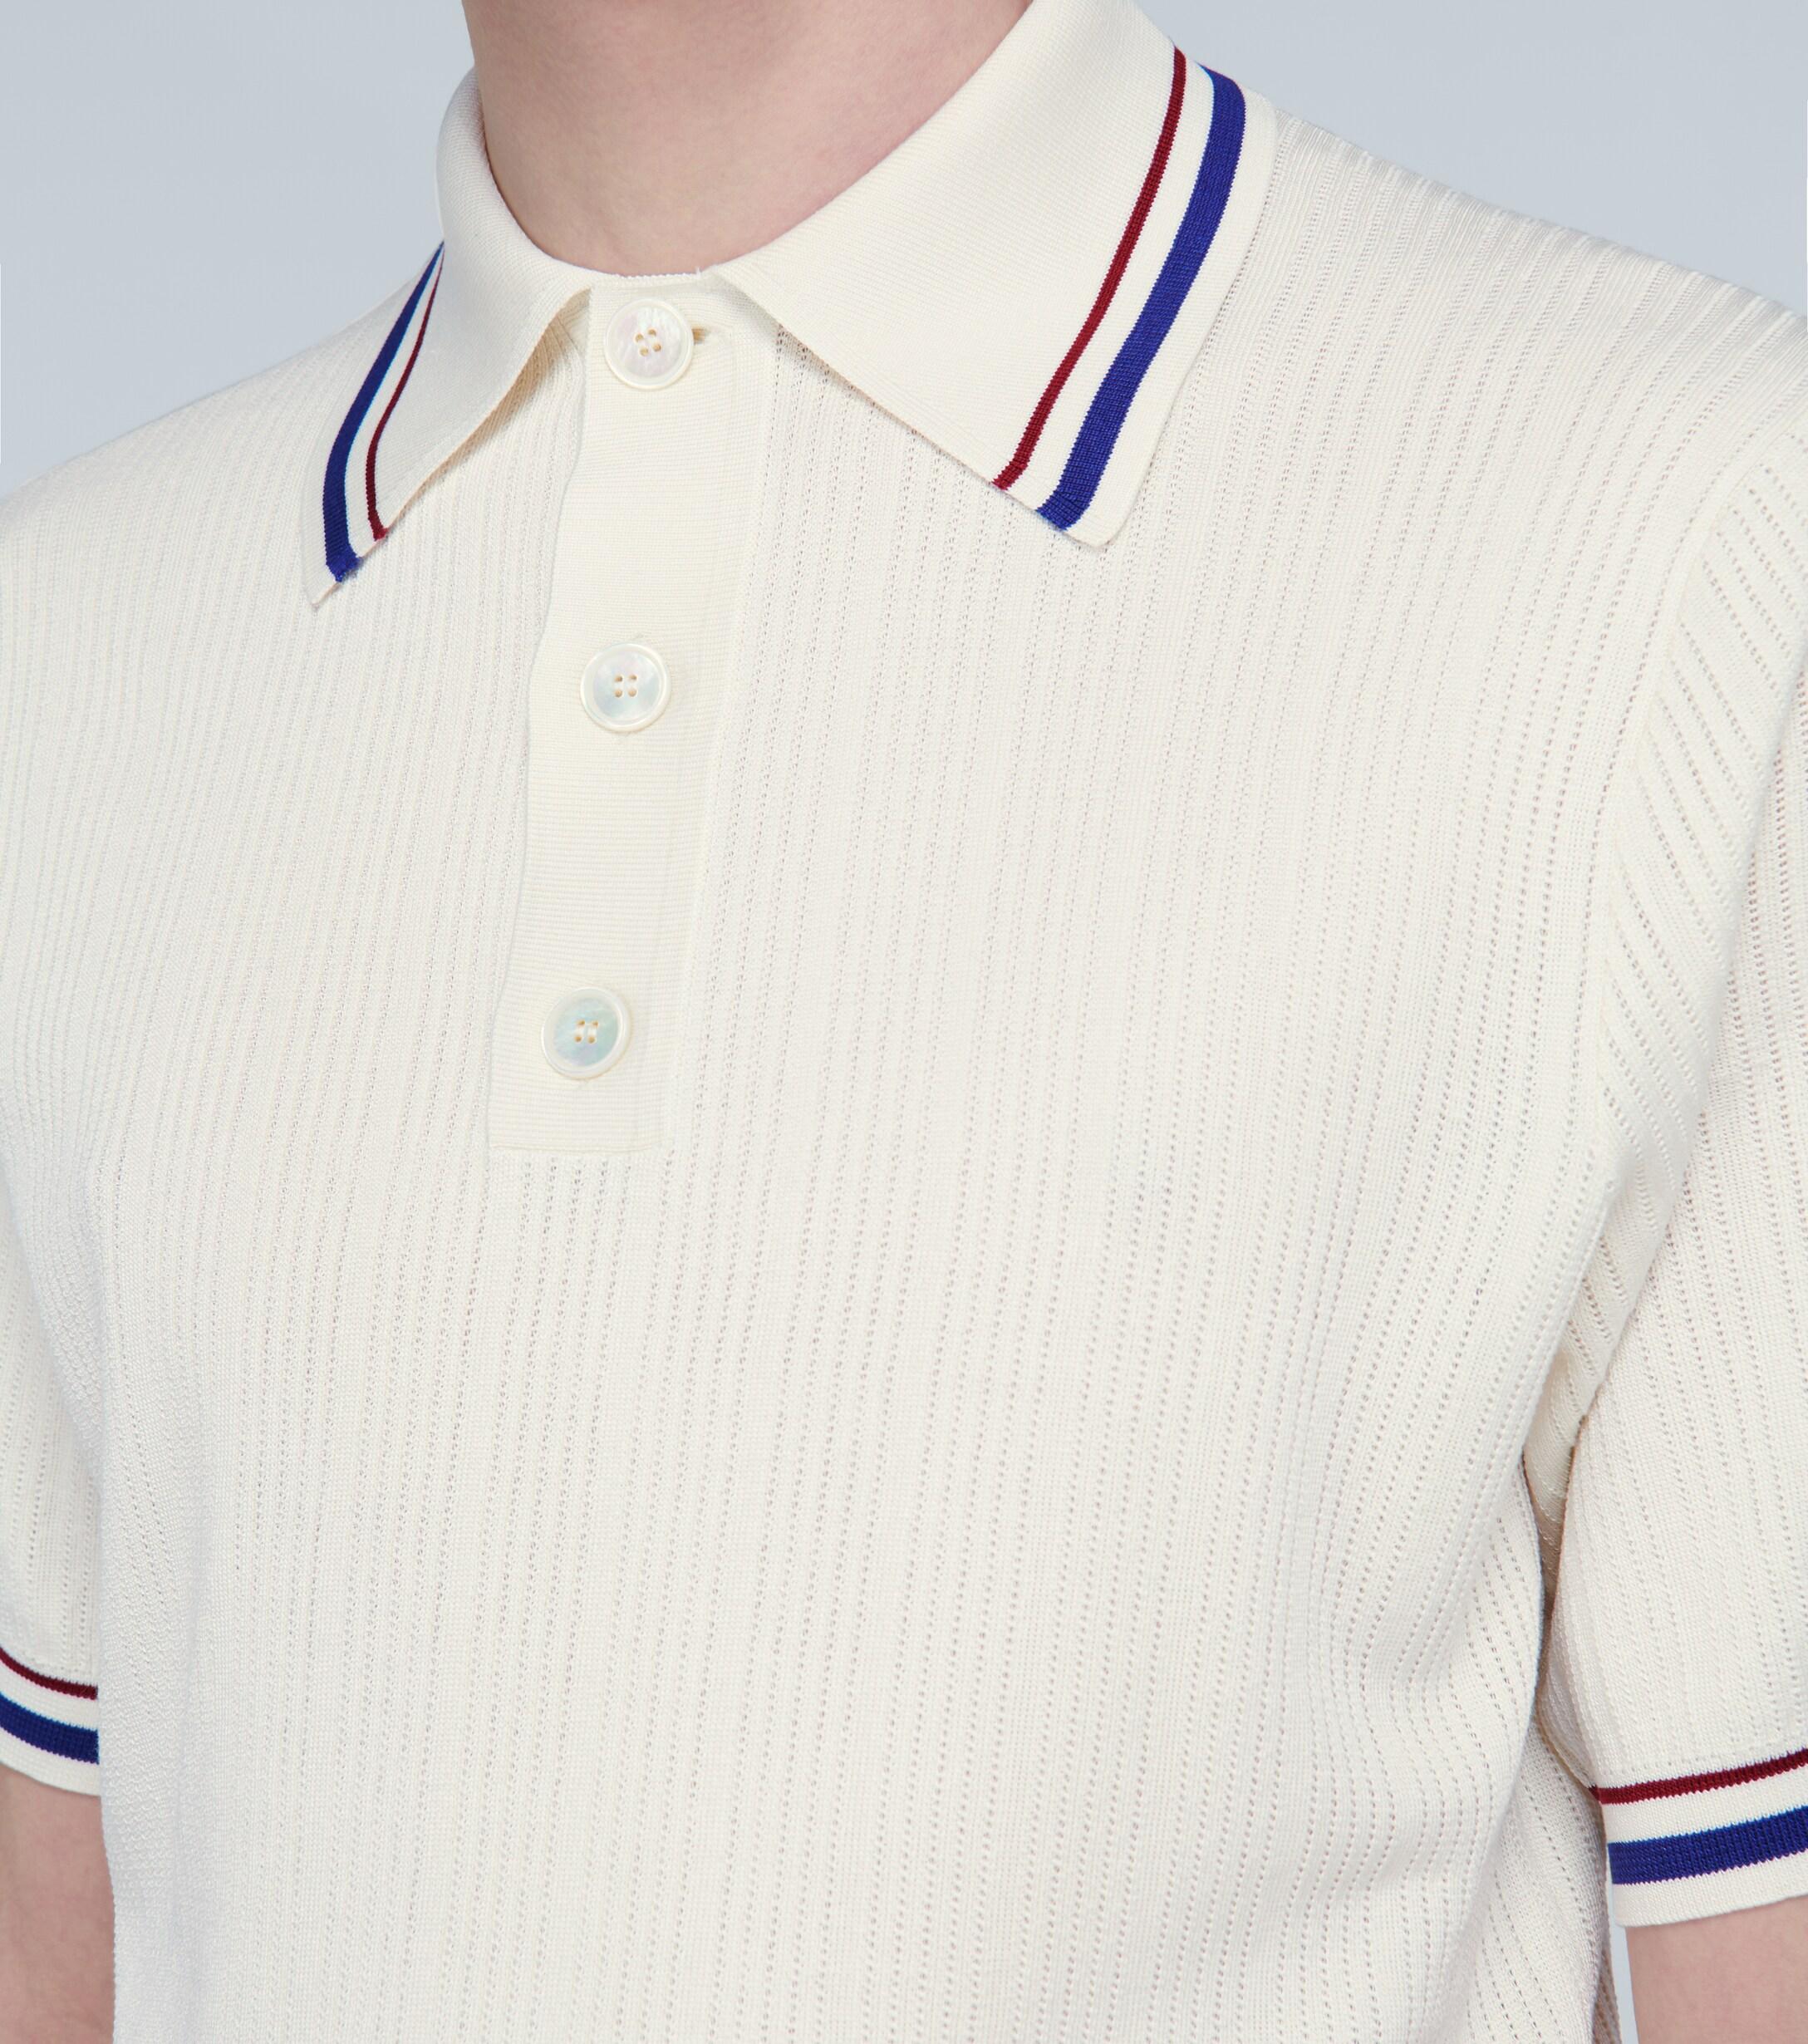 Dolce & Gabbana Silk Ribbed-knit Polo Shirt in White for Men - Lyst